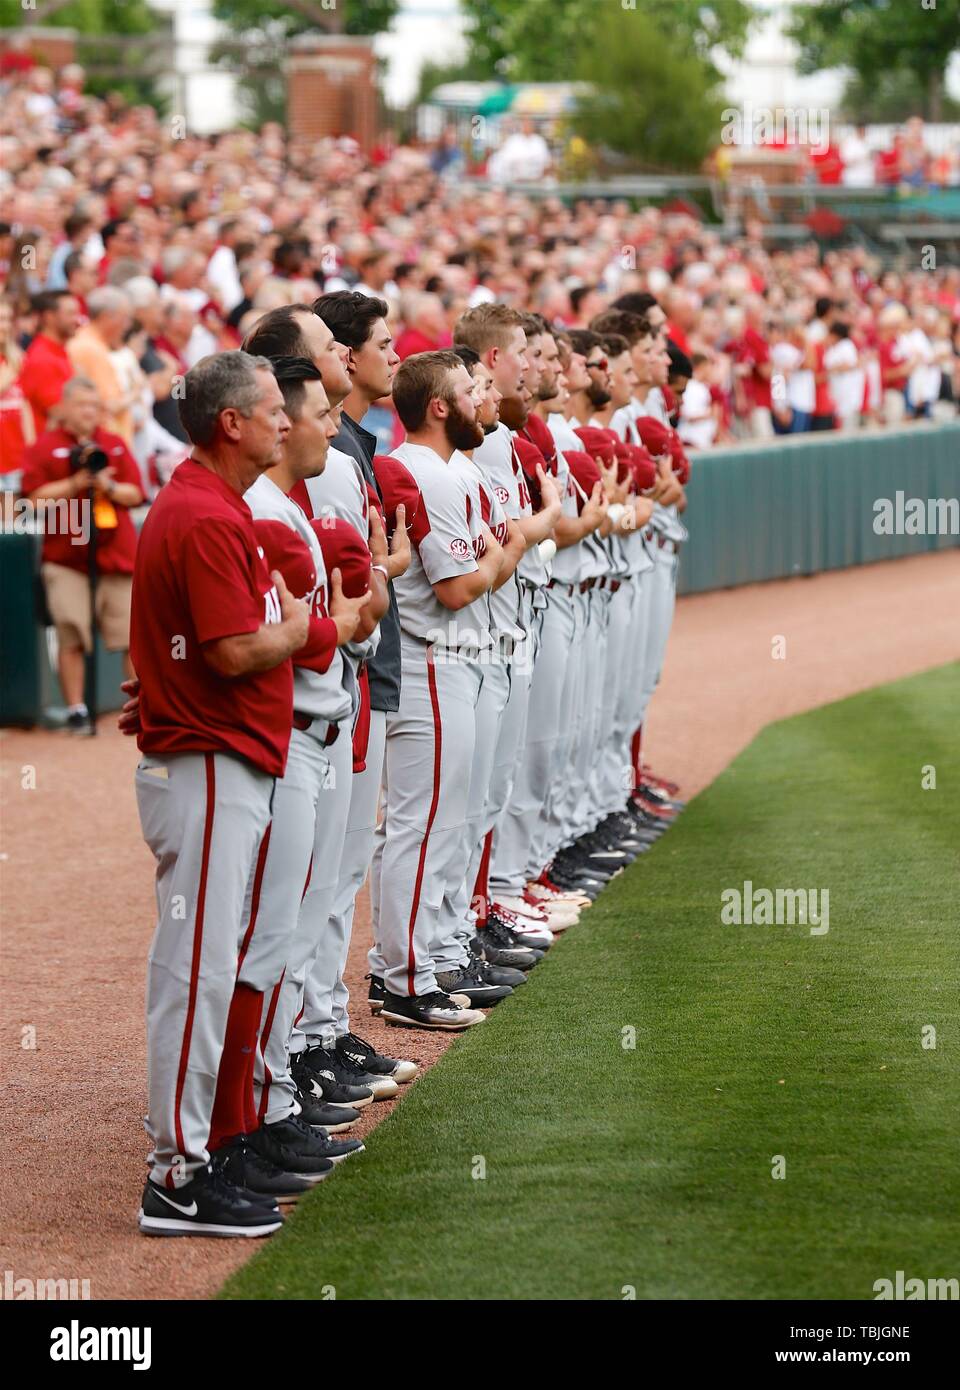 June 1, 2019: The Arkansas Razorback baseball team lines up along third base for the National Anthem. Arkansas defeated TCU 3-1 in Fayetteville, AR, Richey Miller/CSM Stock Photo